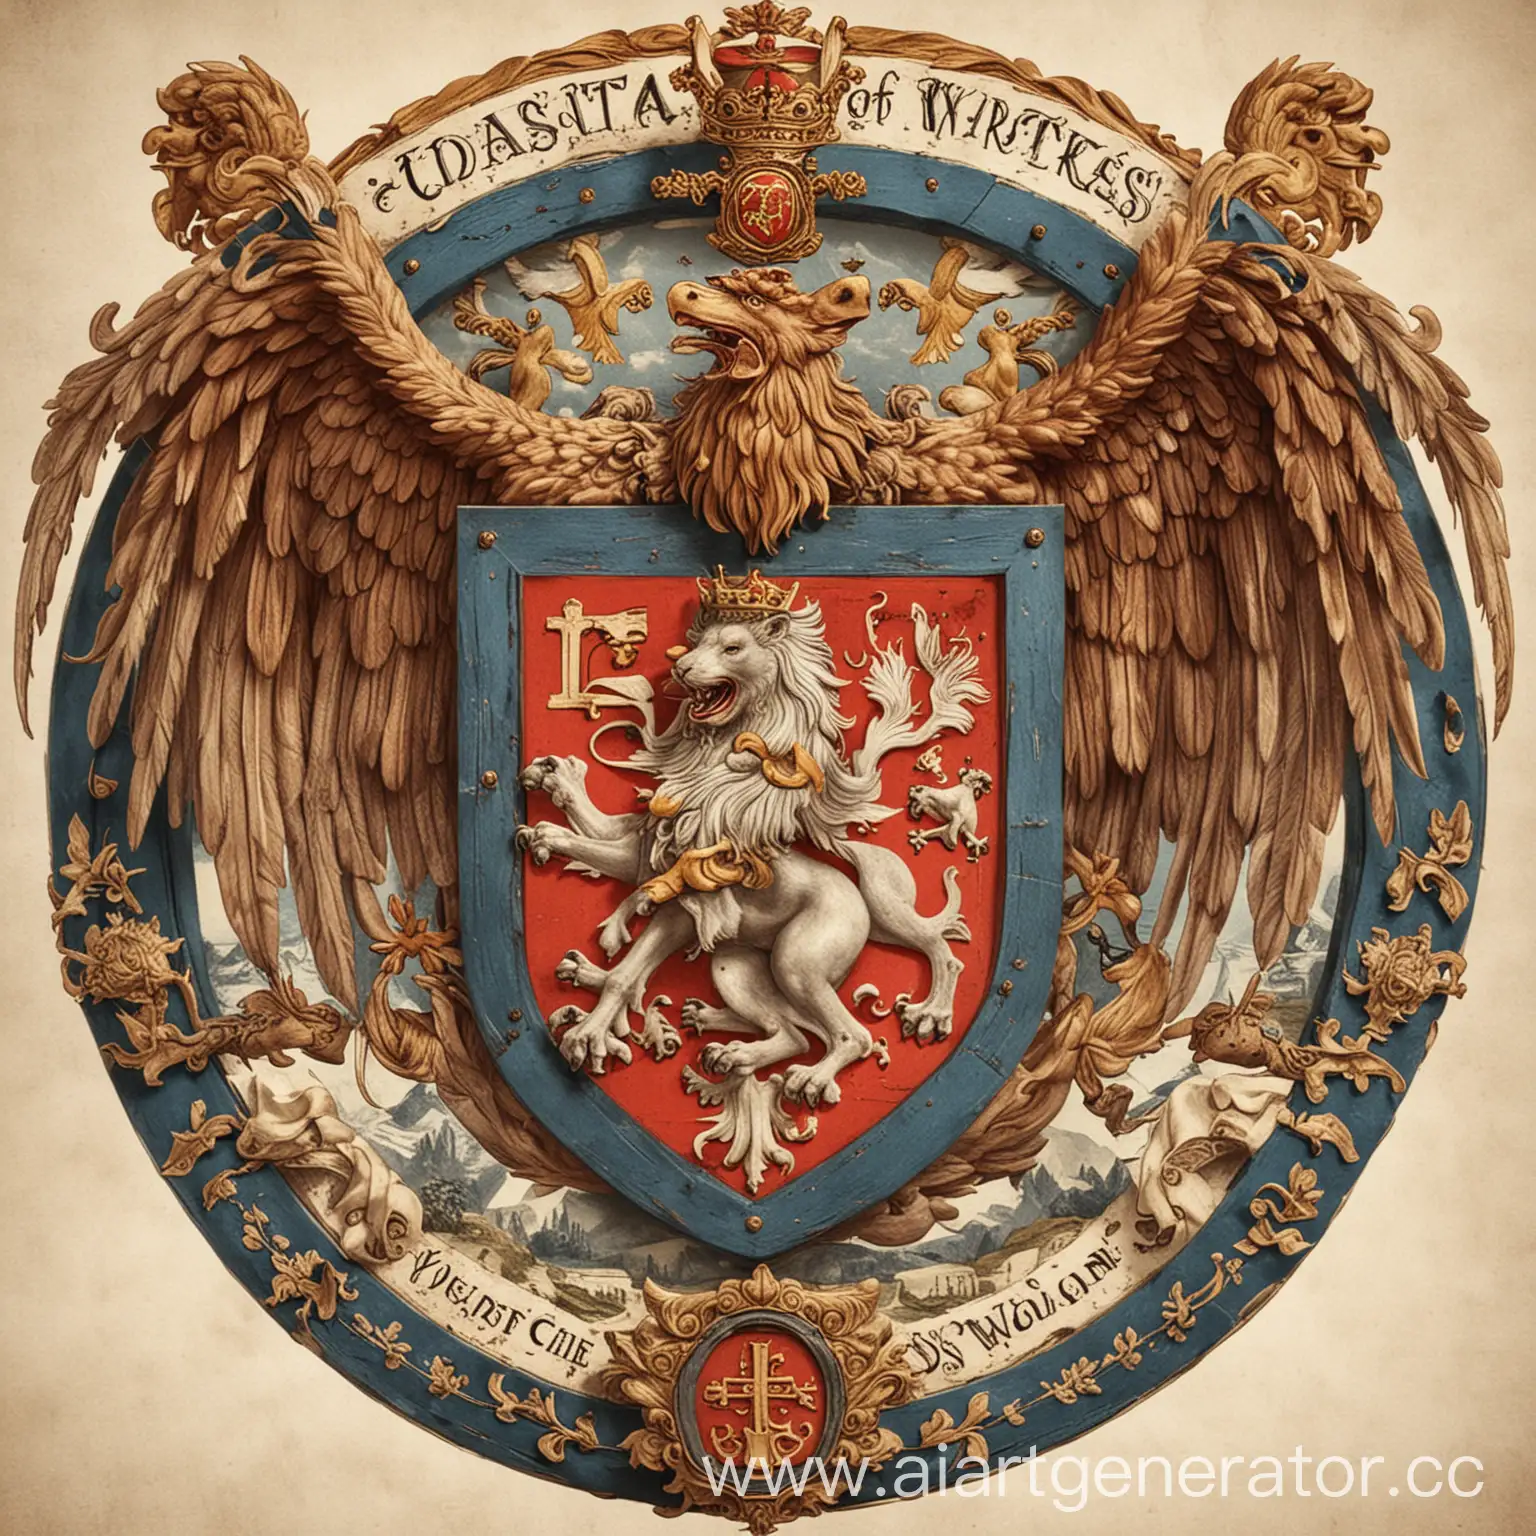 Global-Coat-of-Arms-Symbolizing-Unity-and-Diversity-Across-Nations